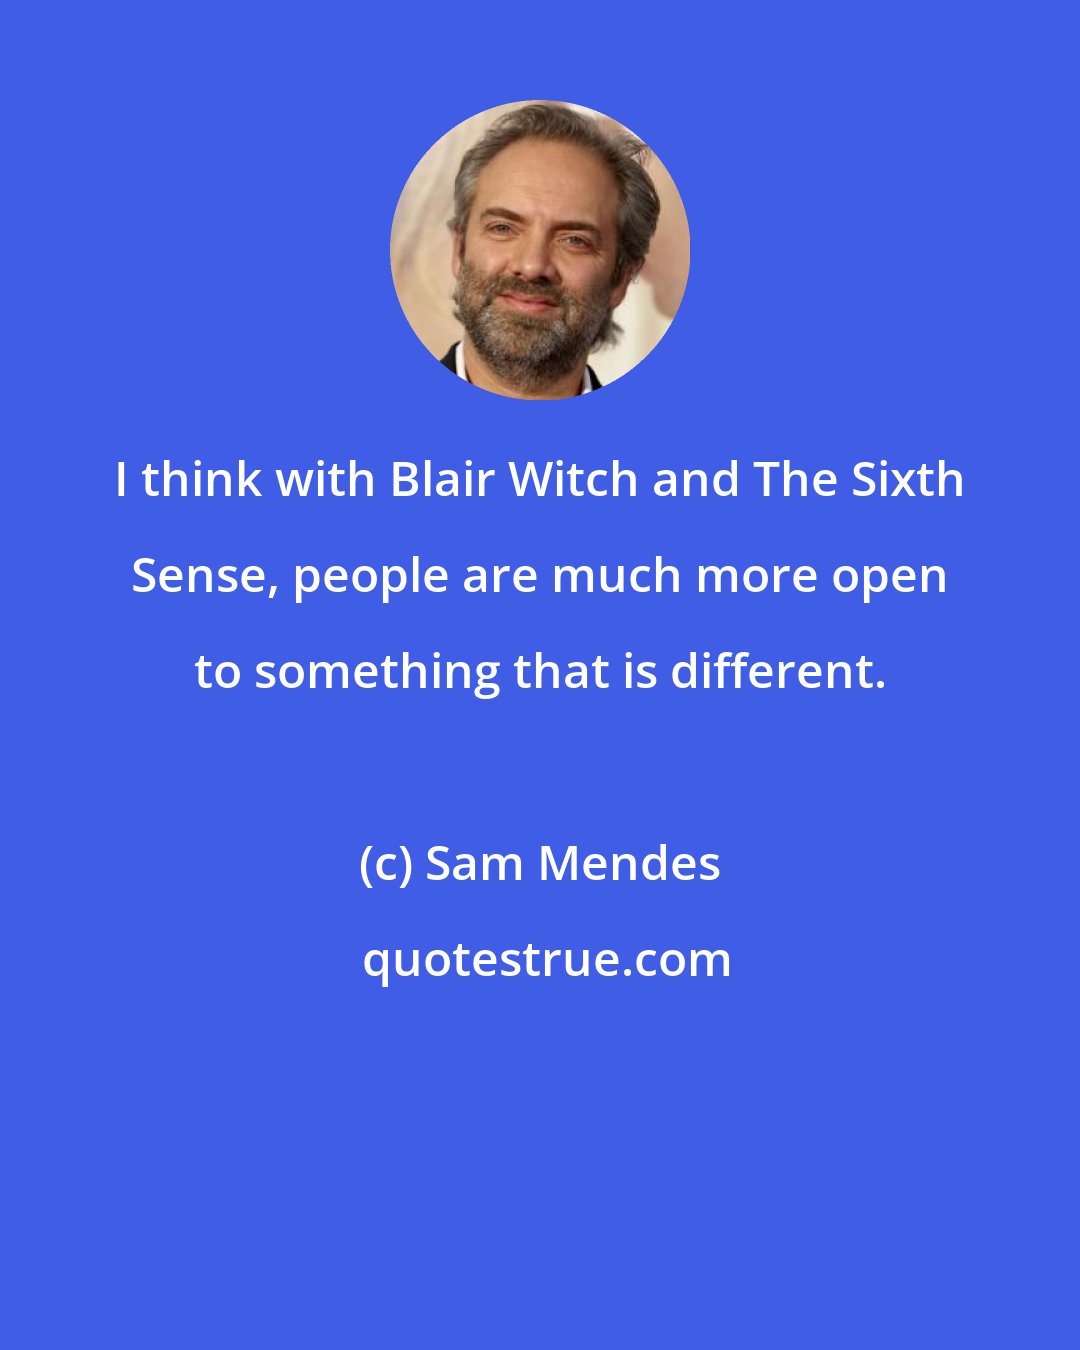 Sam Mendes: I think with Blair Witch and The Sixth Sense, people are much more open to something that is different.